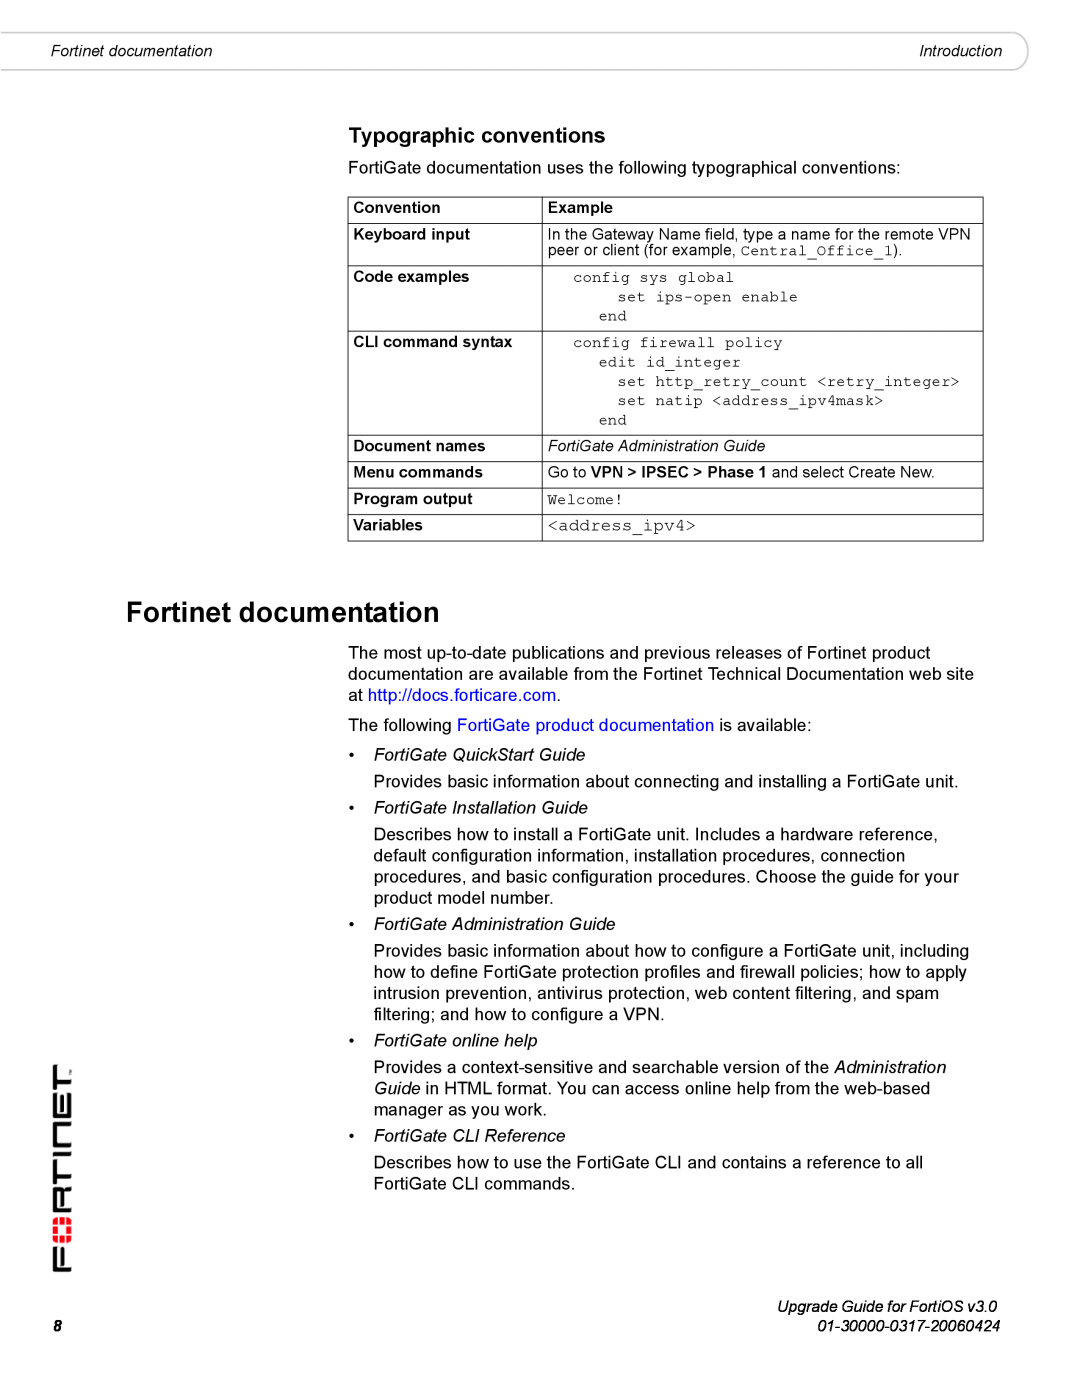 Fortinet FortiOS 3.0 Fortinet documentation, Typographic conventions, FortiGate QuickStart Guide, FortiGate online help 